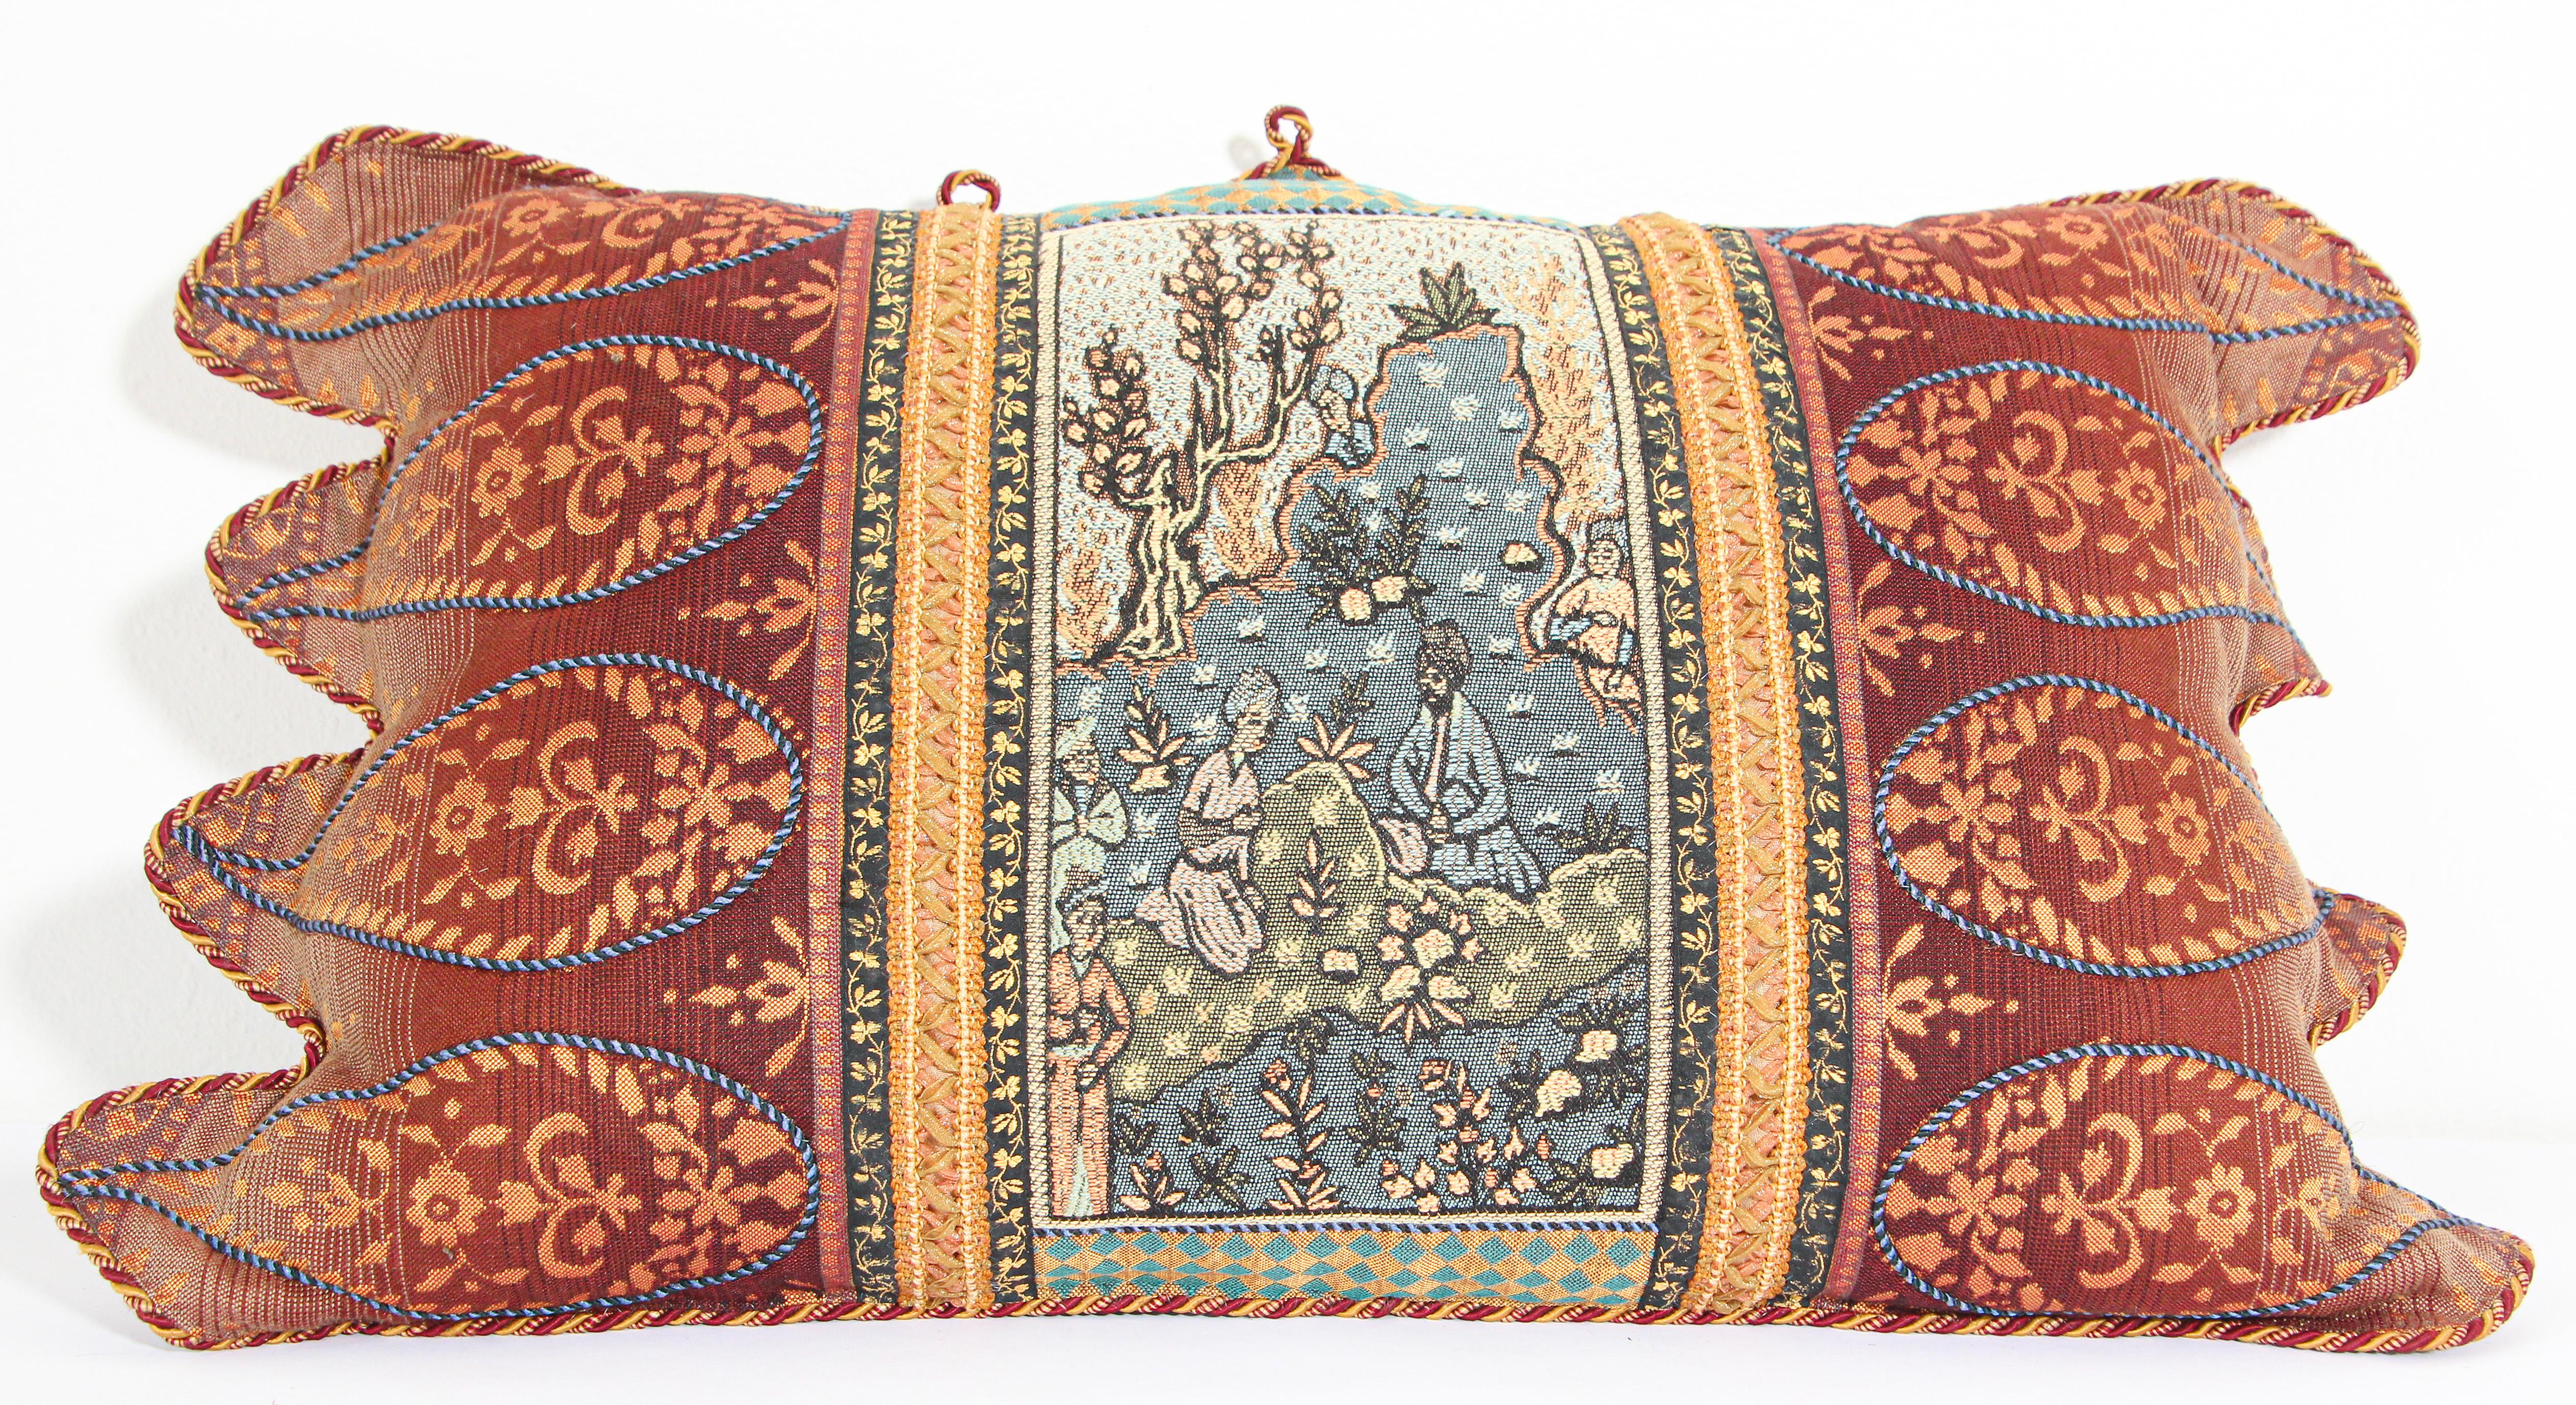 Middle Eastern decorative throw pillow and tapestry.
Luxury silk in beige with an accent textile fragment with a Middle Eastern scene and decorative silk trim has been applied to finish the edges.